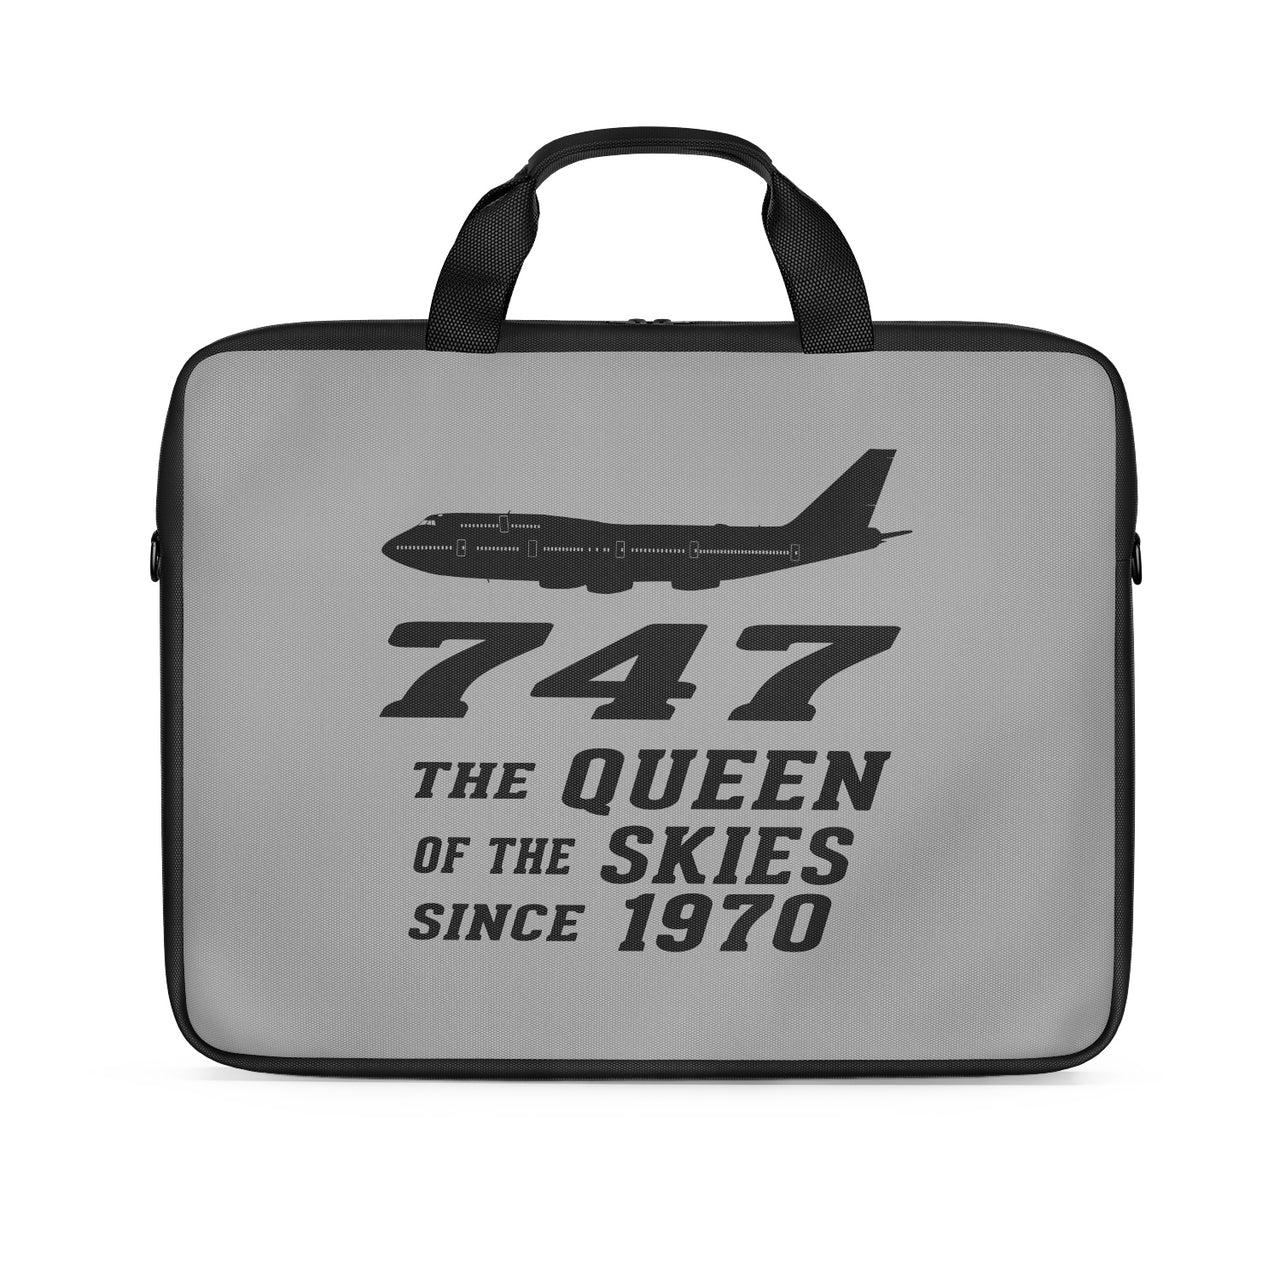 Boeing 747 - Queen of the Skies (2) Designed Laptop & Tablet Bags